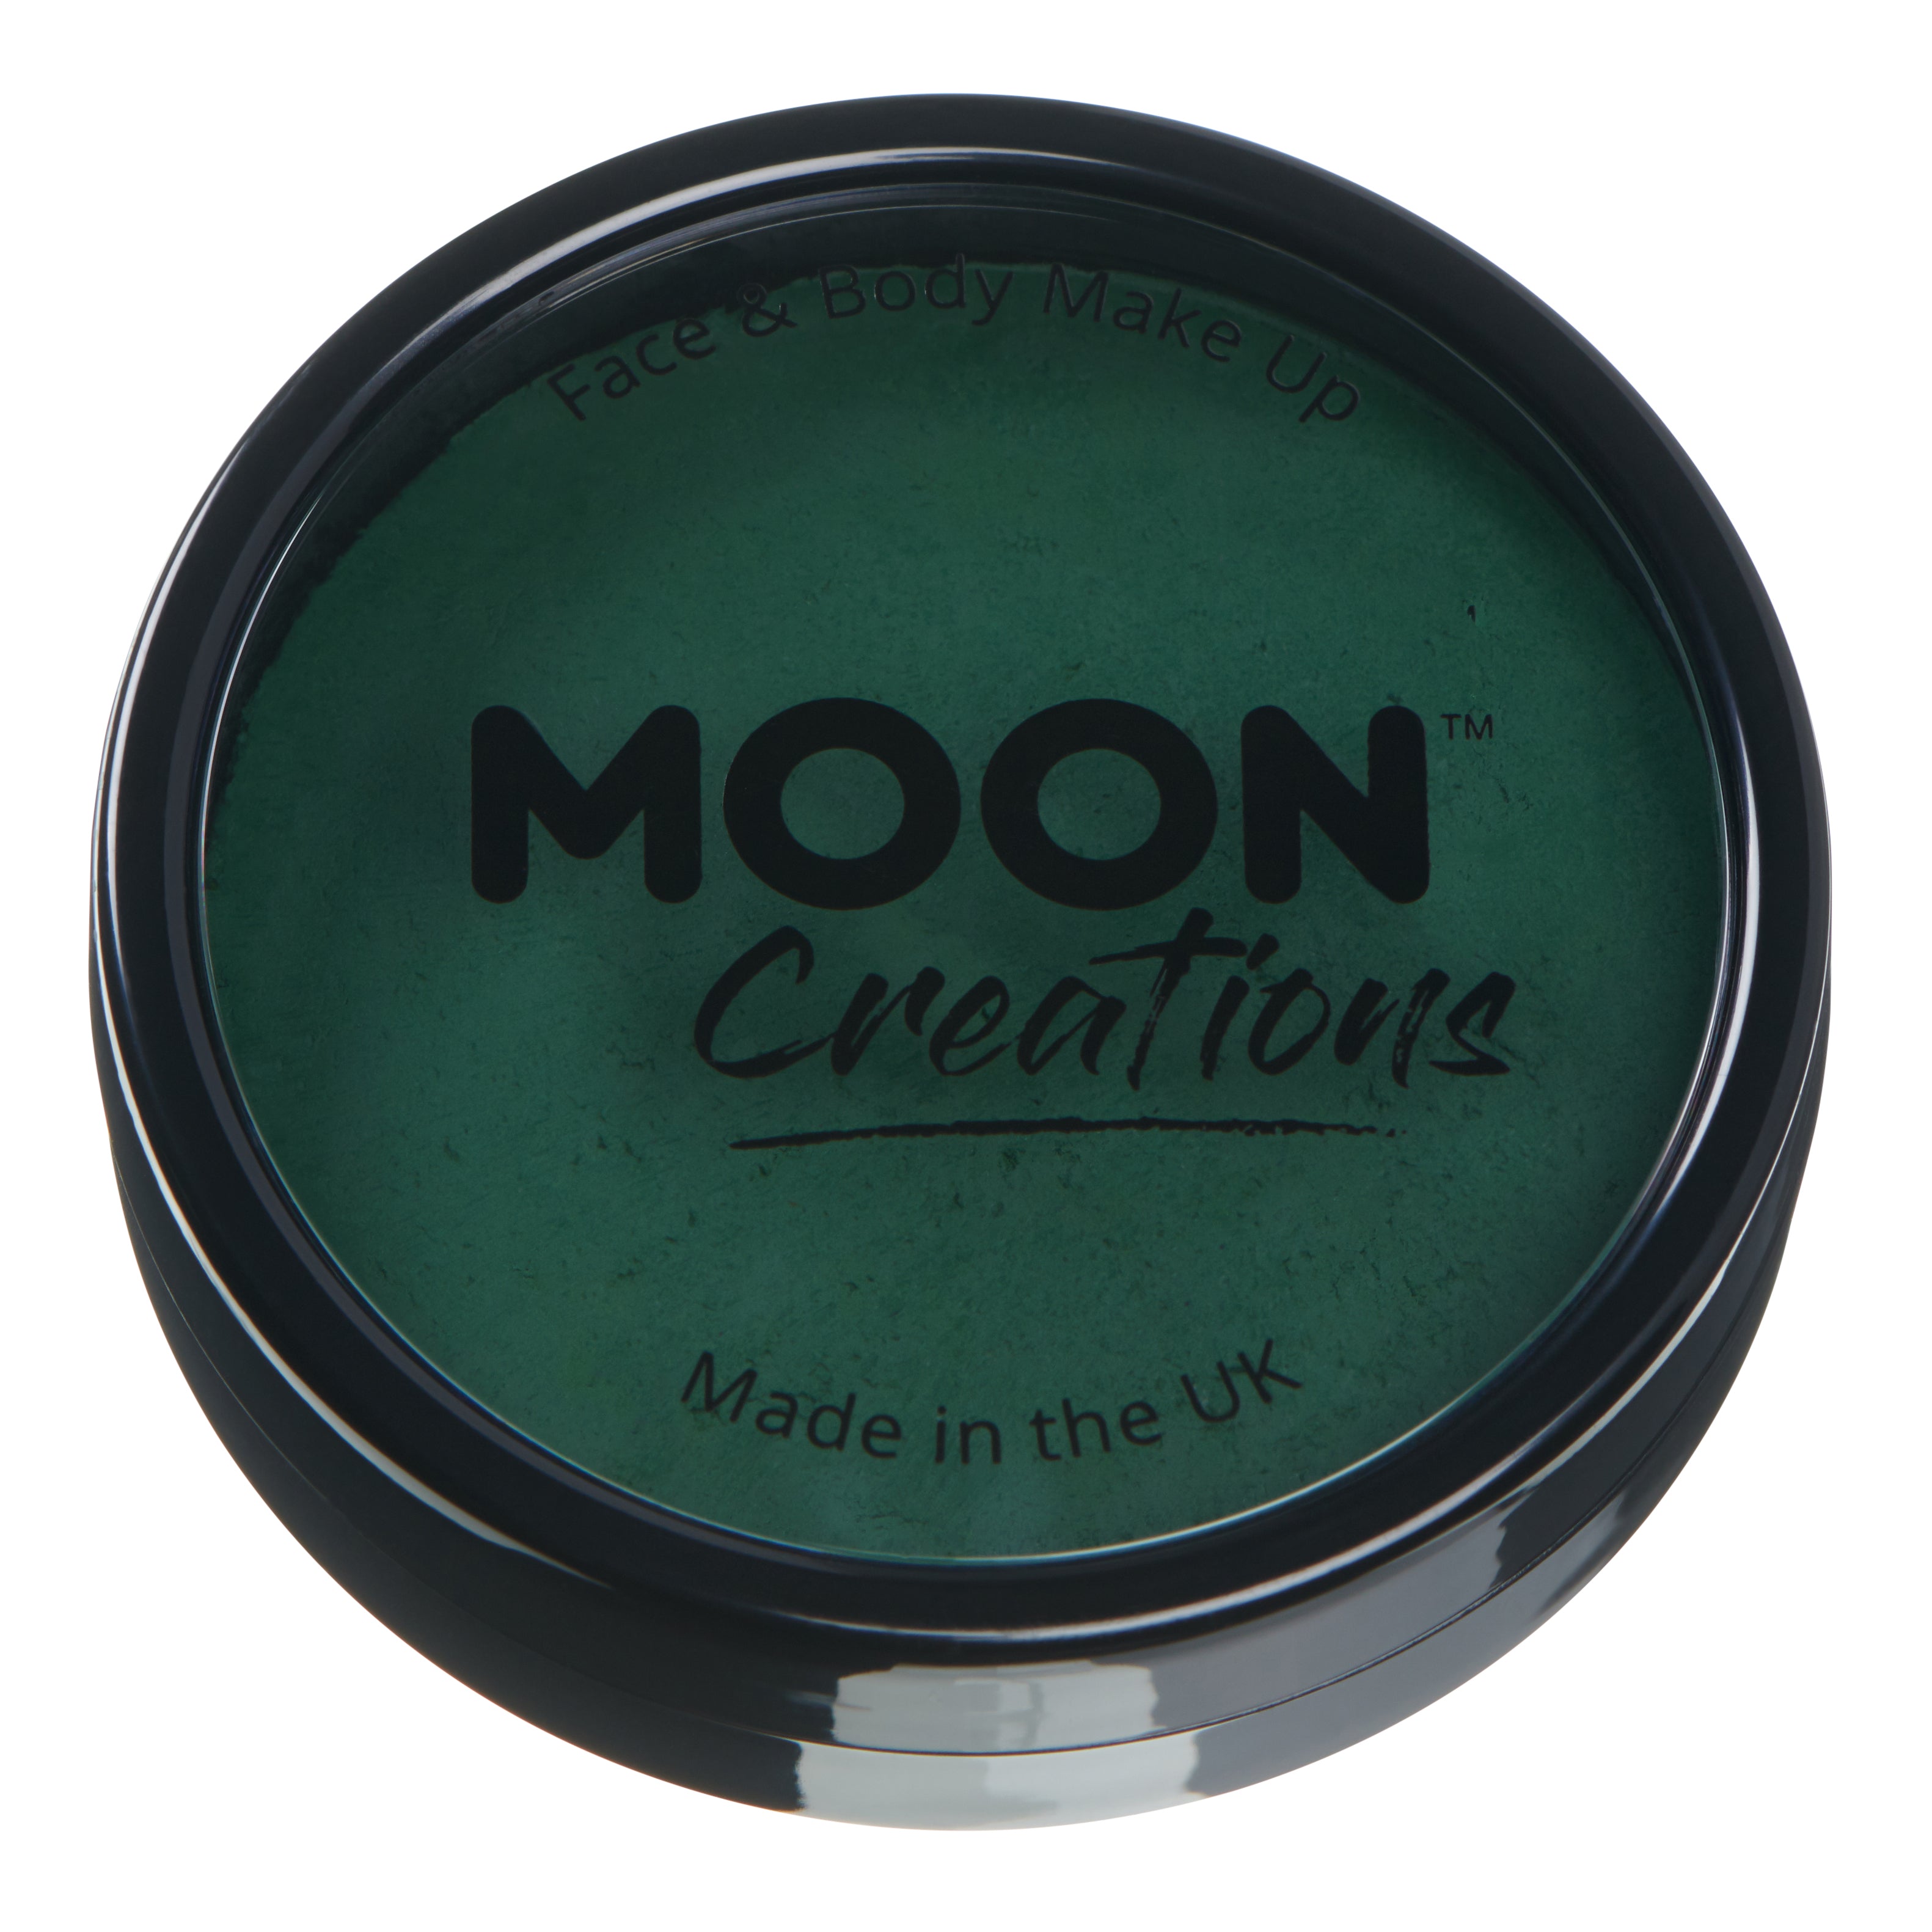 Dark Green - Professional Face Paint, 36g. Cosmetically certified, FDA & Health Canada compliant, cruelty free and vegan.